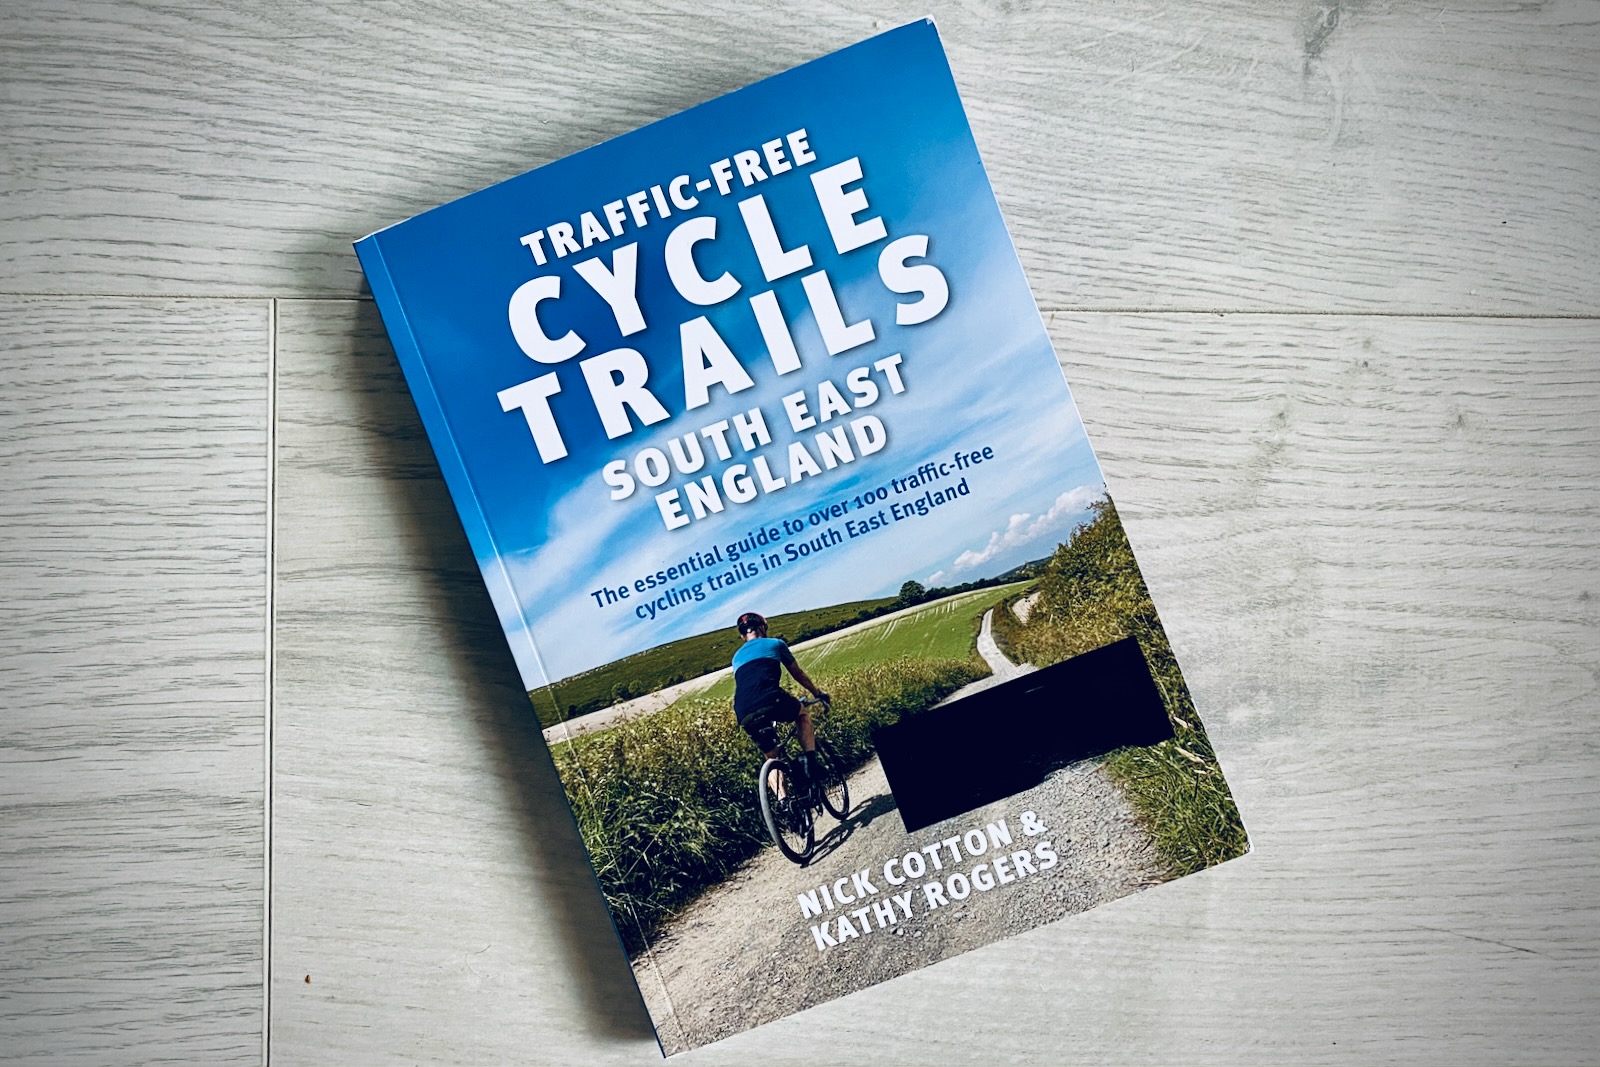 ‘Traffic-Free Cycle Trails South East England’ by Nick Cotton and Kathy Rogers